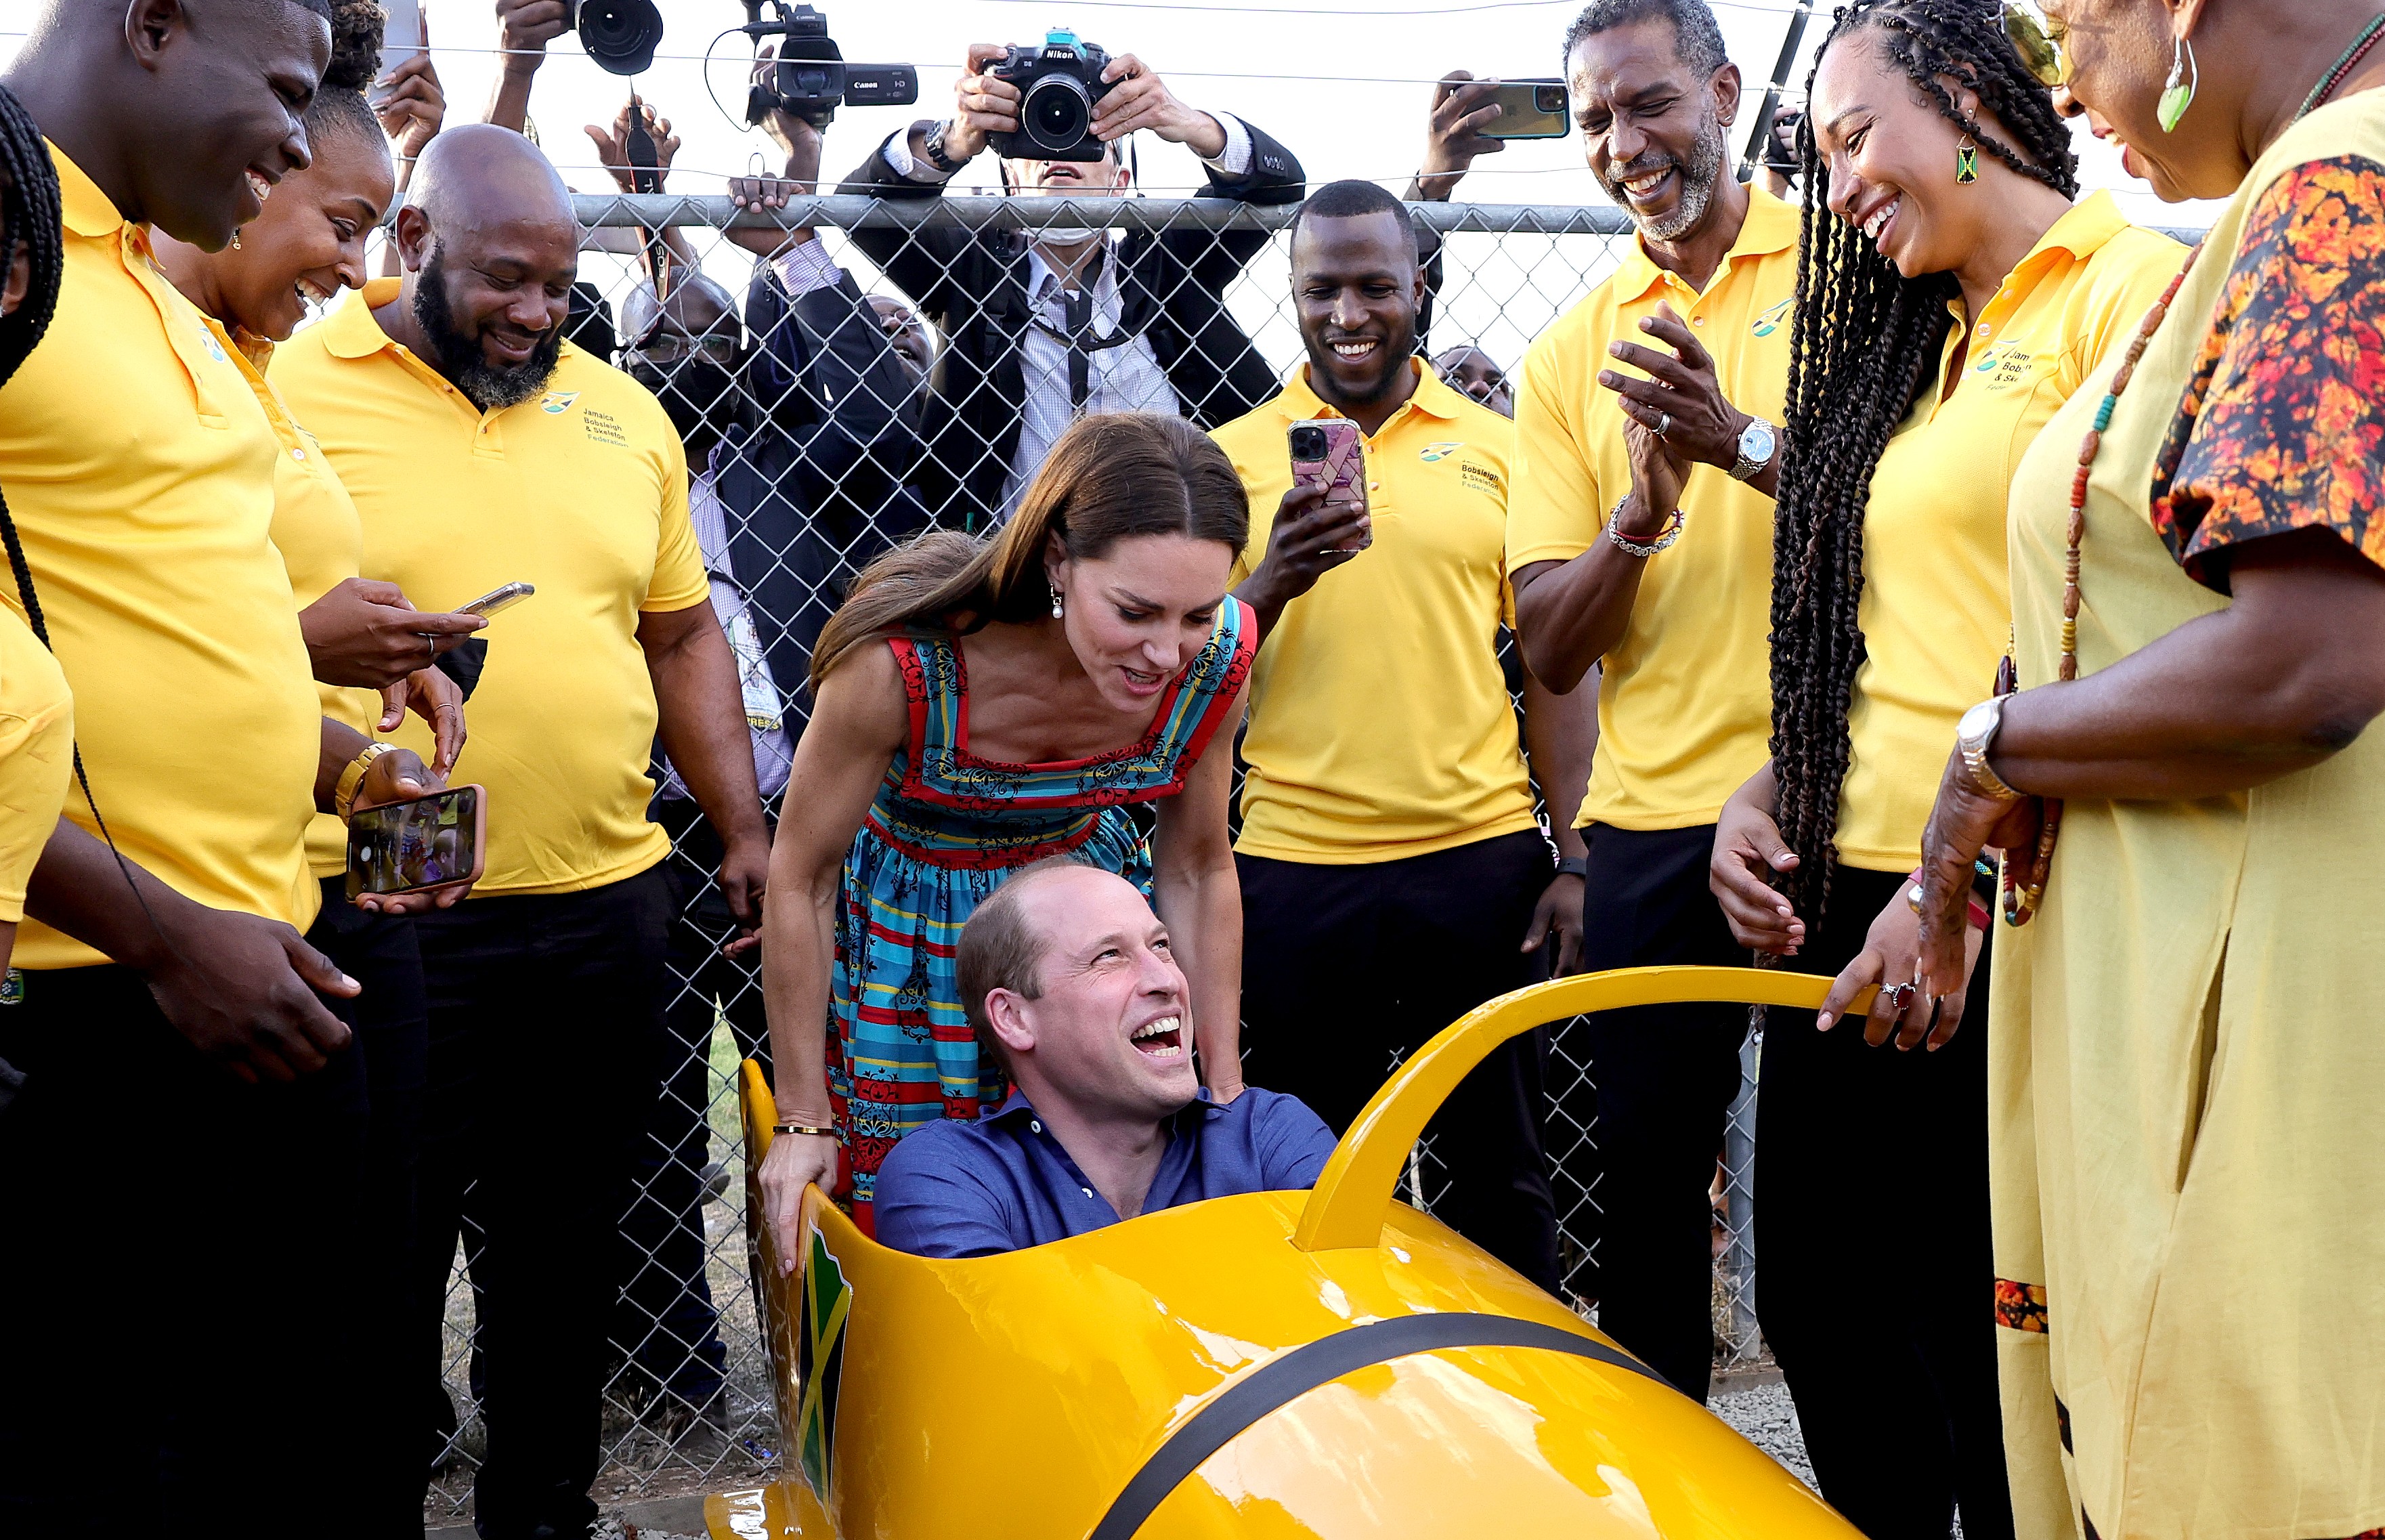 KINGSTON, JAMAICA - MARCH 22: Prince William, Duke of Cambridge and Catherine, Duchess of Cambridge meet the Jamaican Bobsleigh team in Trench Town on day four of the Platinum Jubilee Royal Tour of the Caribbean on March 22, 2022 in Kingston, Jamaica. The (Foto: Getty Images)